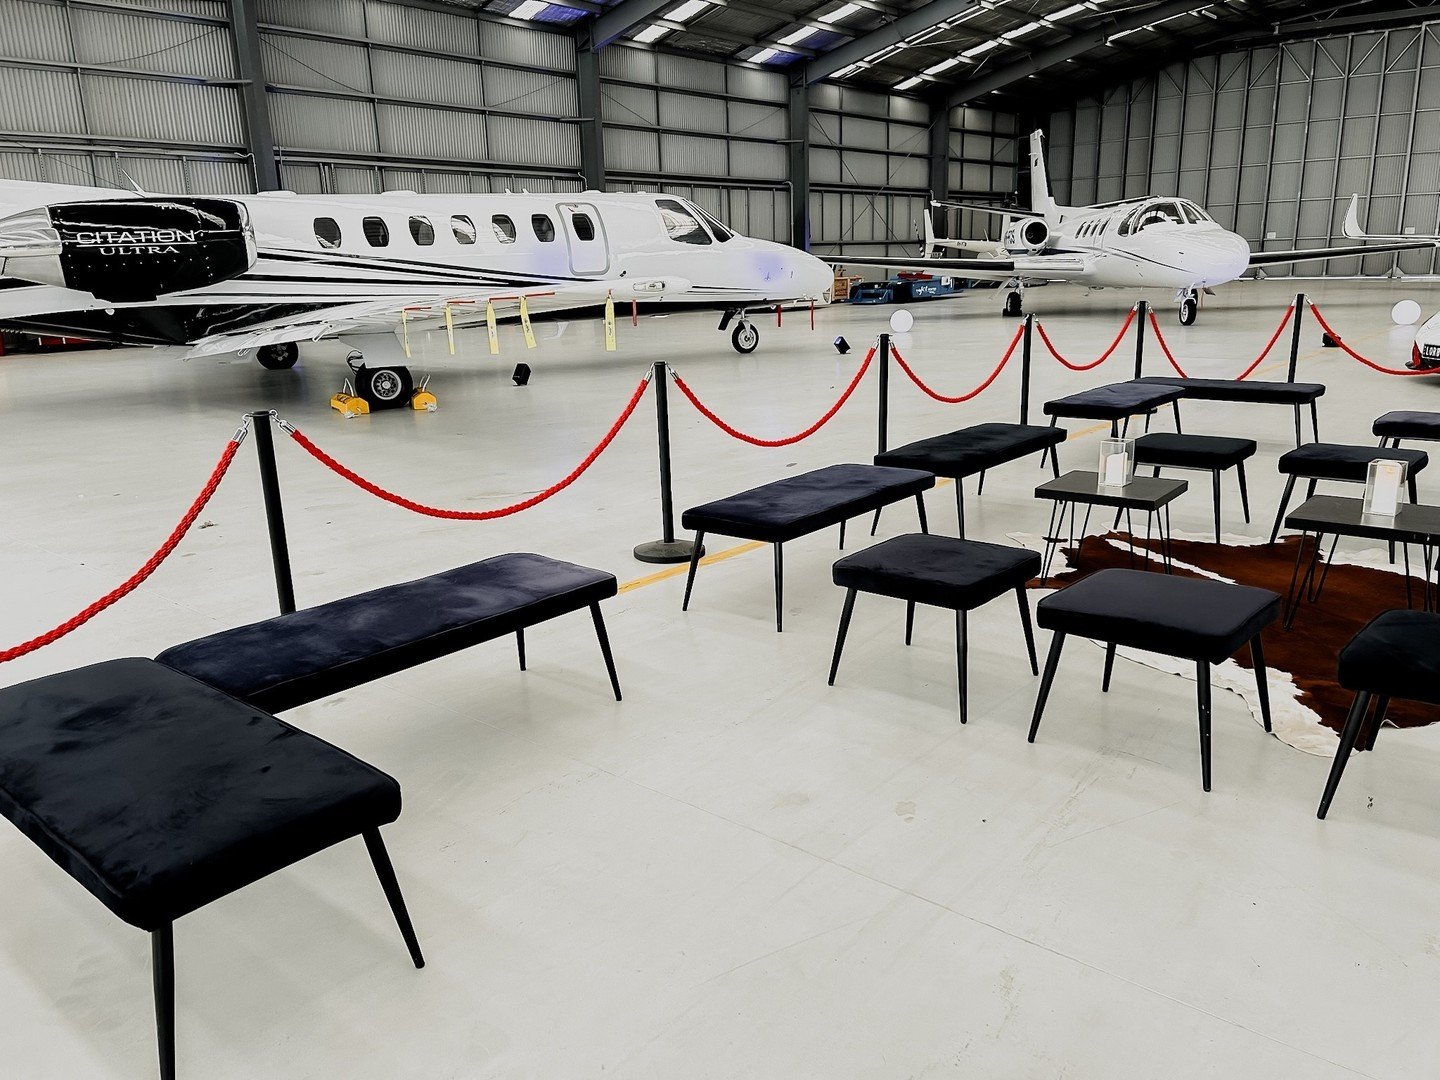 No caption is going to top this picture so we will just let the image do the talking!⁠
⁠
We may not be able to supply planes, but we can work with ANY space to create a comfortable setting for you next event, no matter where it is!⁠
⁠
⁠
⁠
⁠
#loungehi